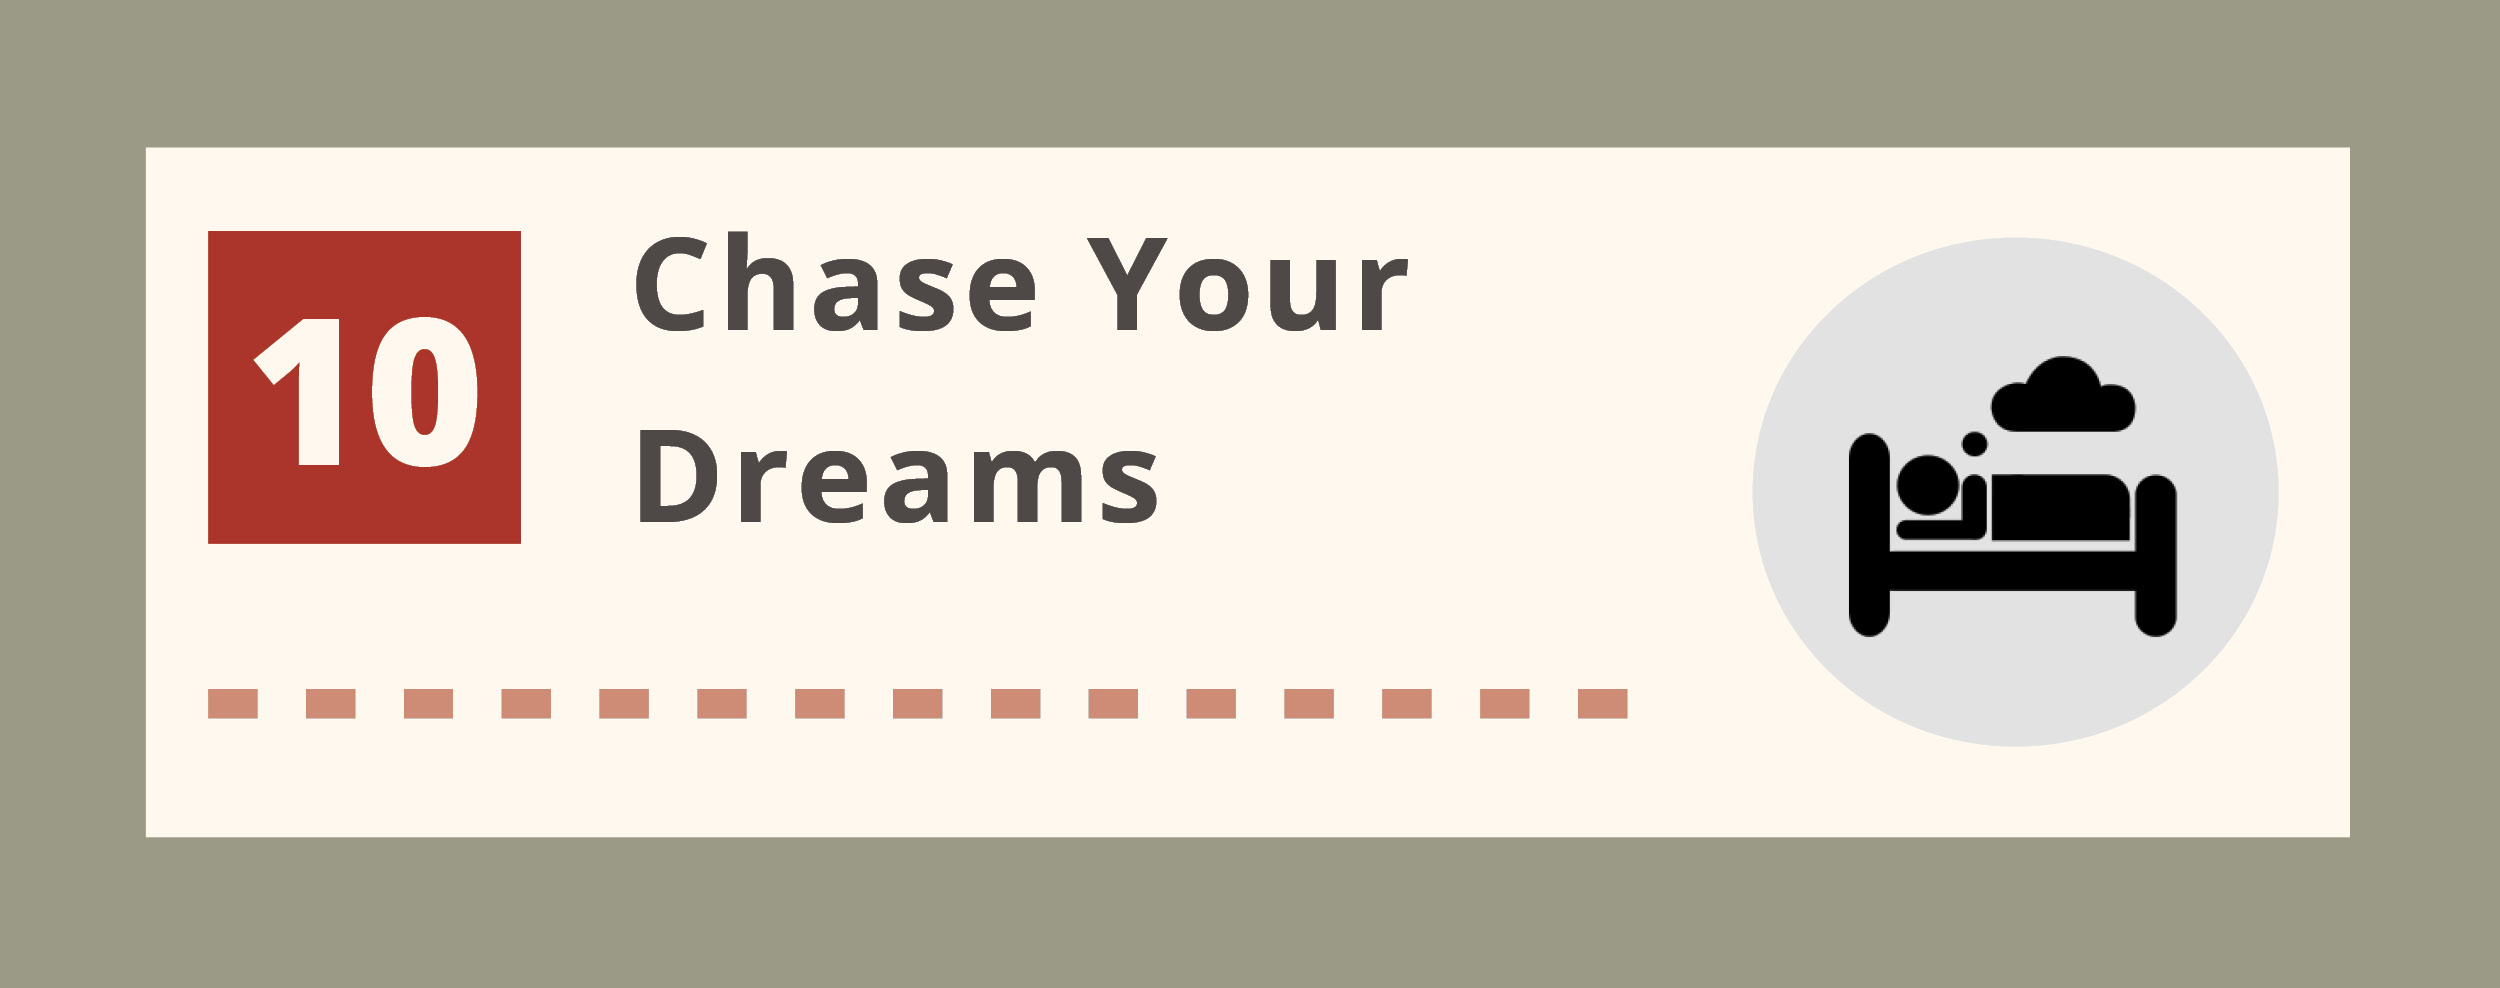 Chase your dreams text